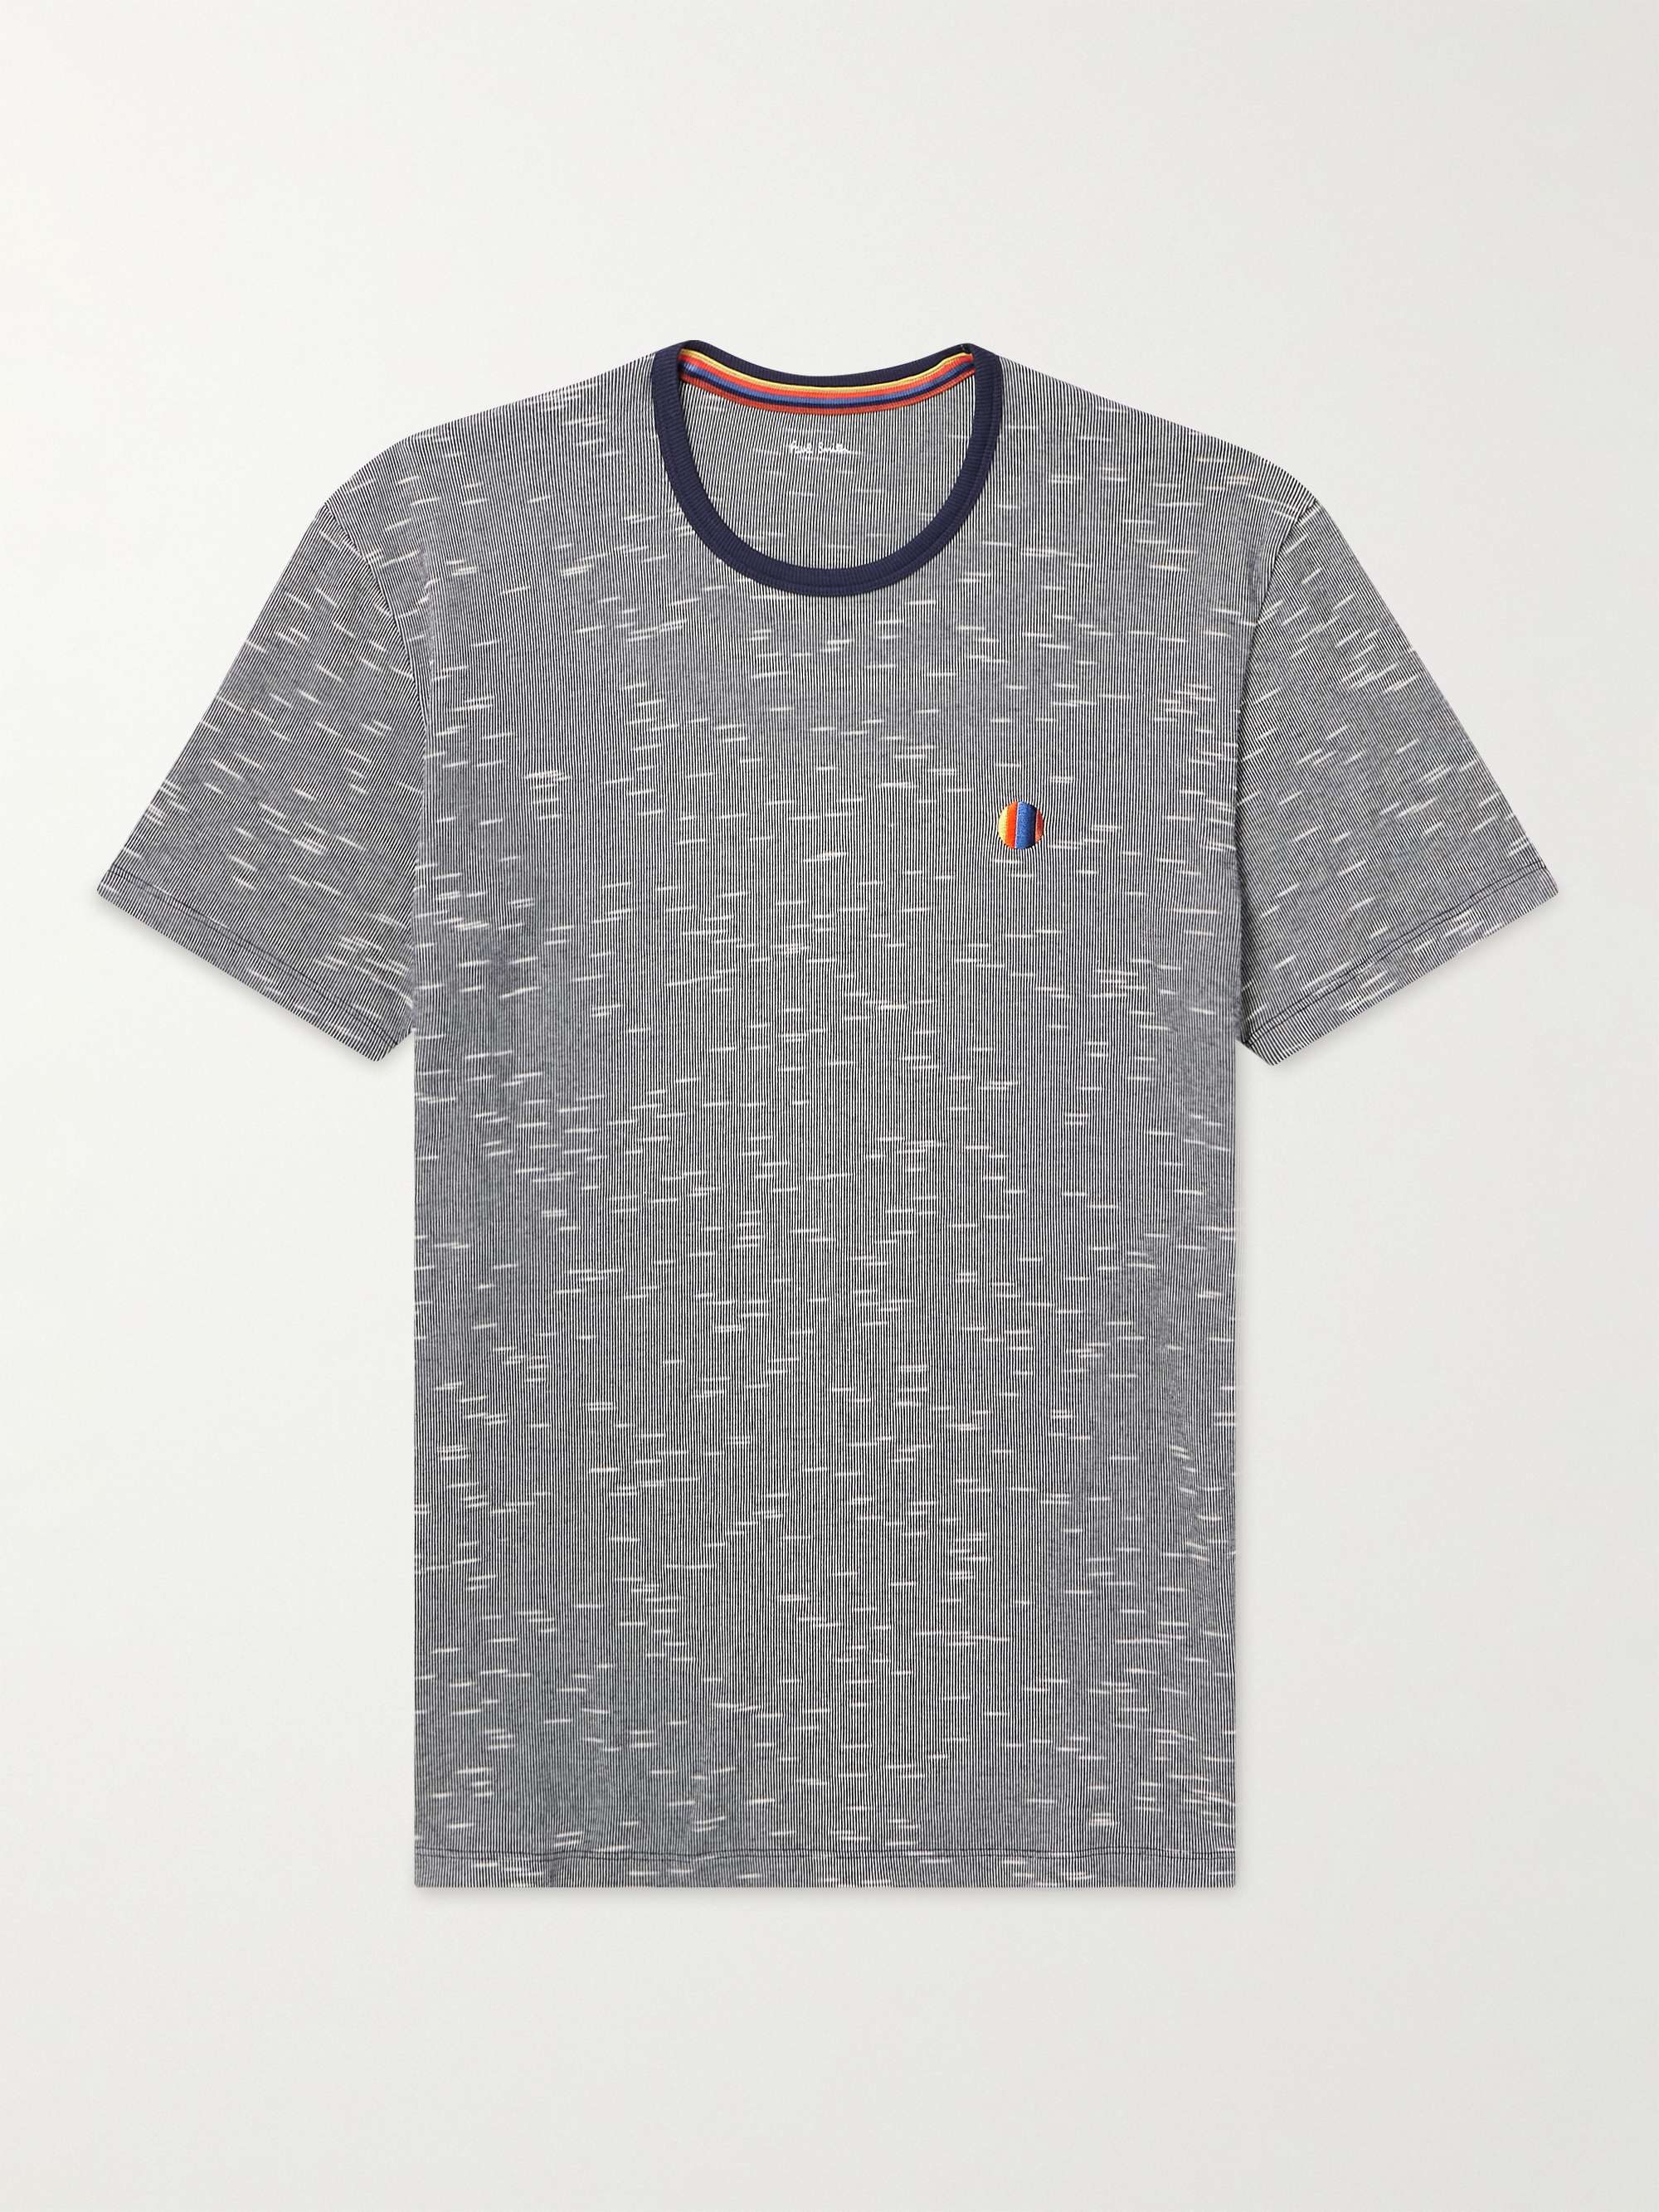 PAUL SMITH Striped Cotton and Modal-Blend Jersey T-Shirt for Men | MR PORTER